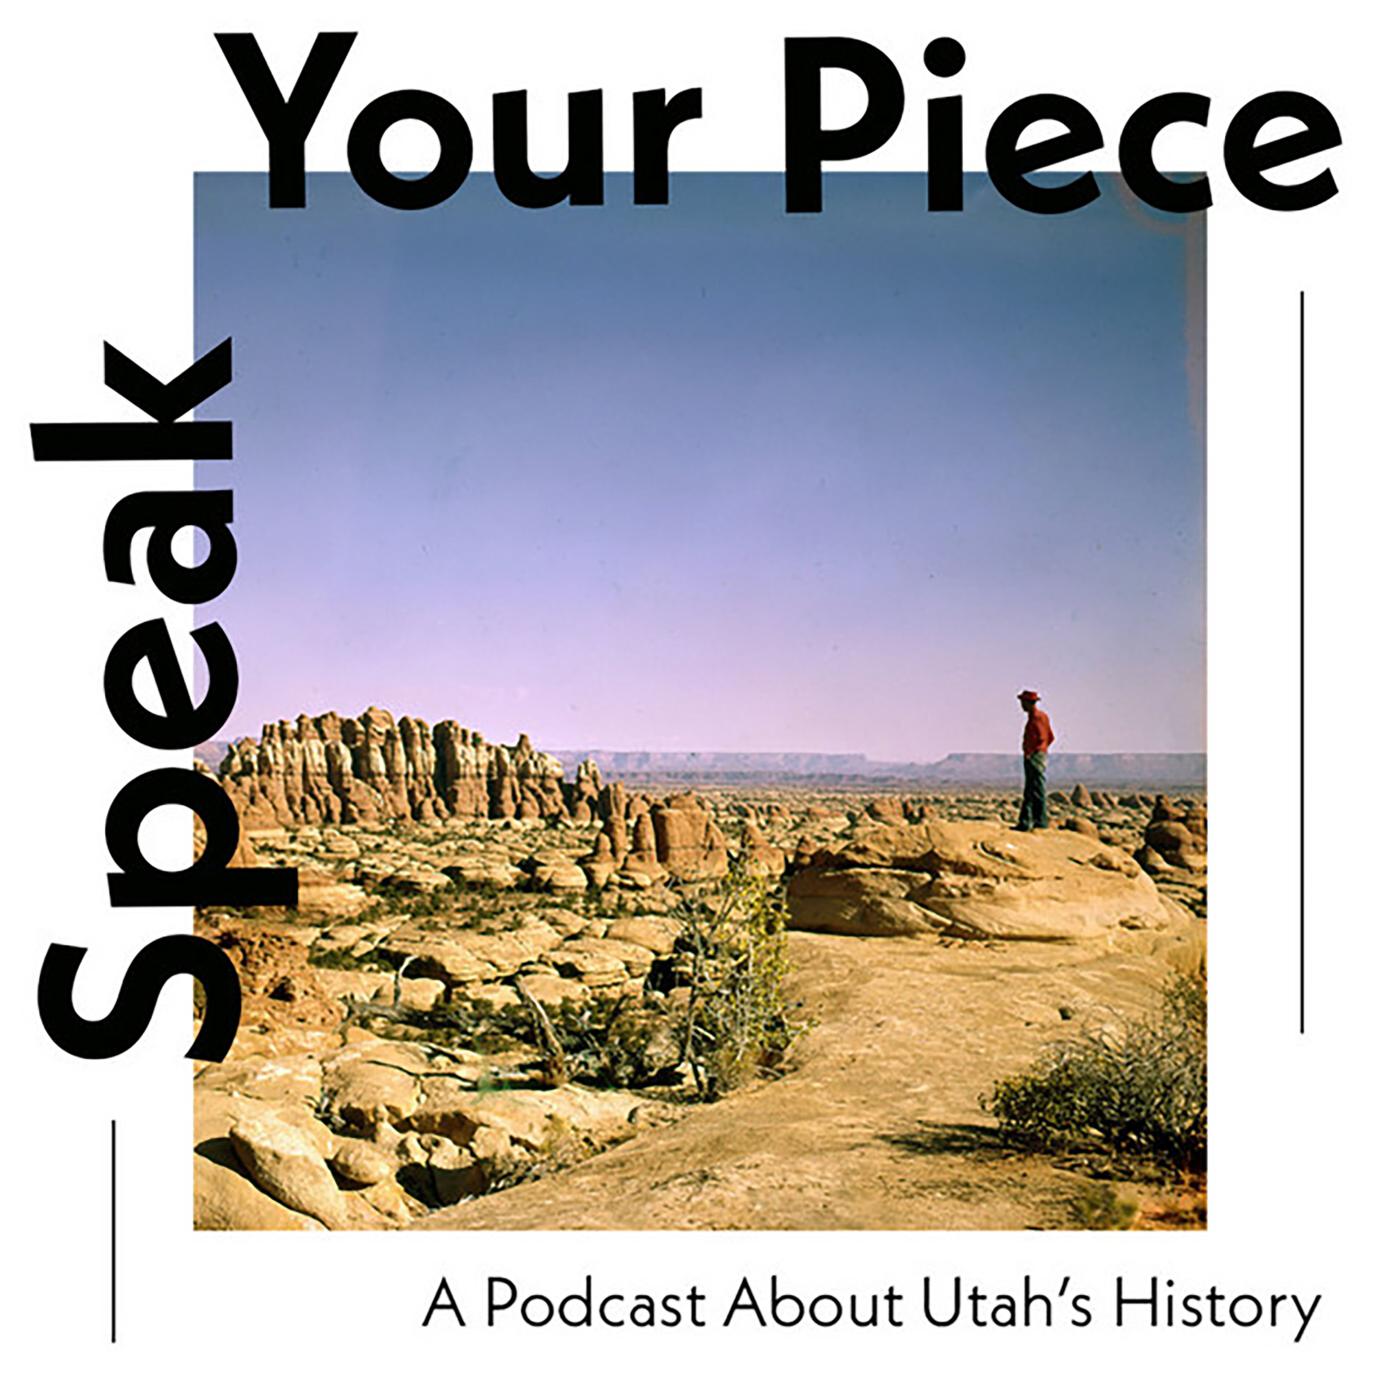 A person standing on a rock looking at rocks. Text: "Speak Your Piece, A Podcast about Utah's histor